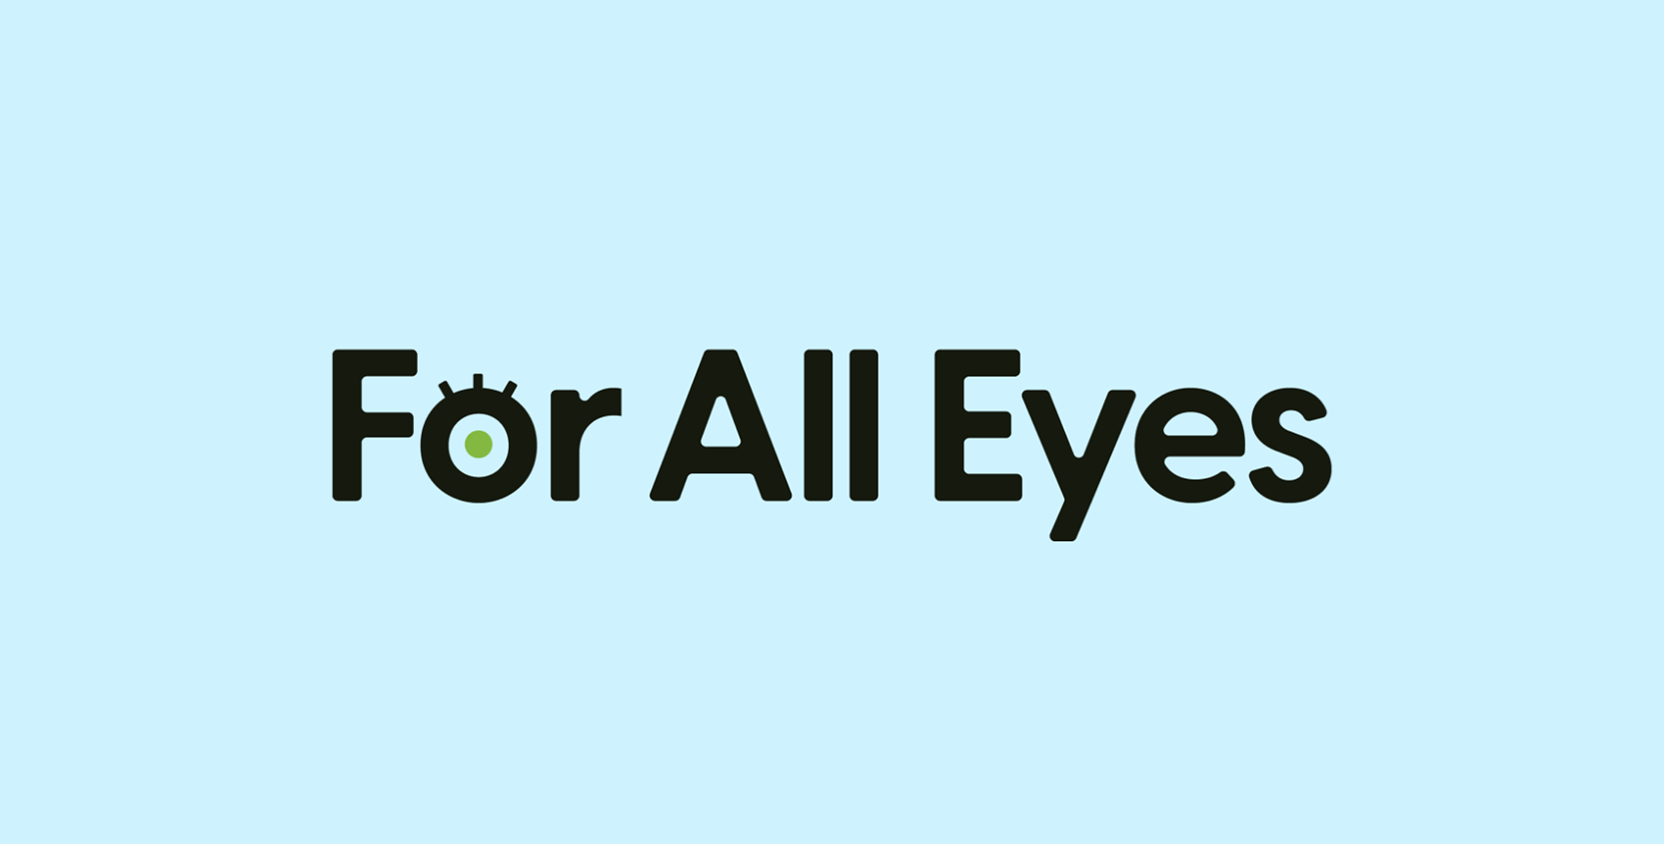 For All Eyes logo on a blue background